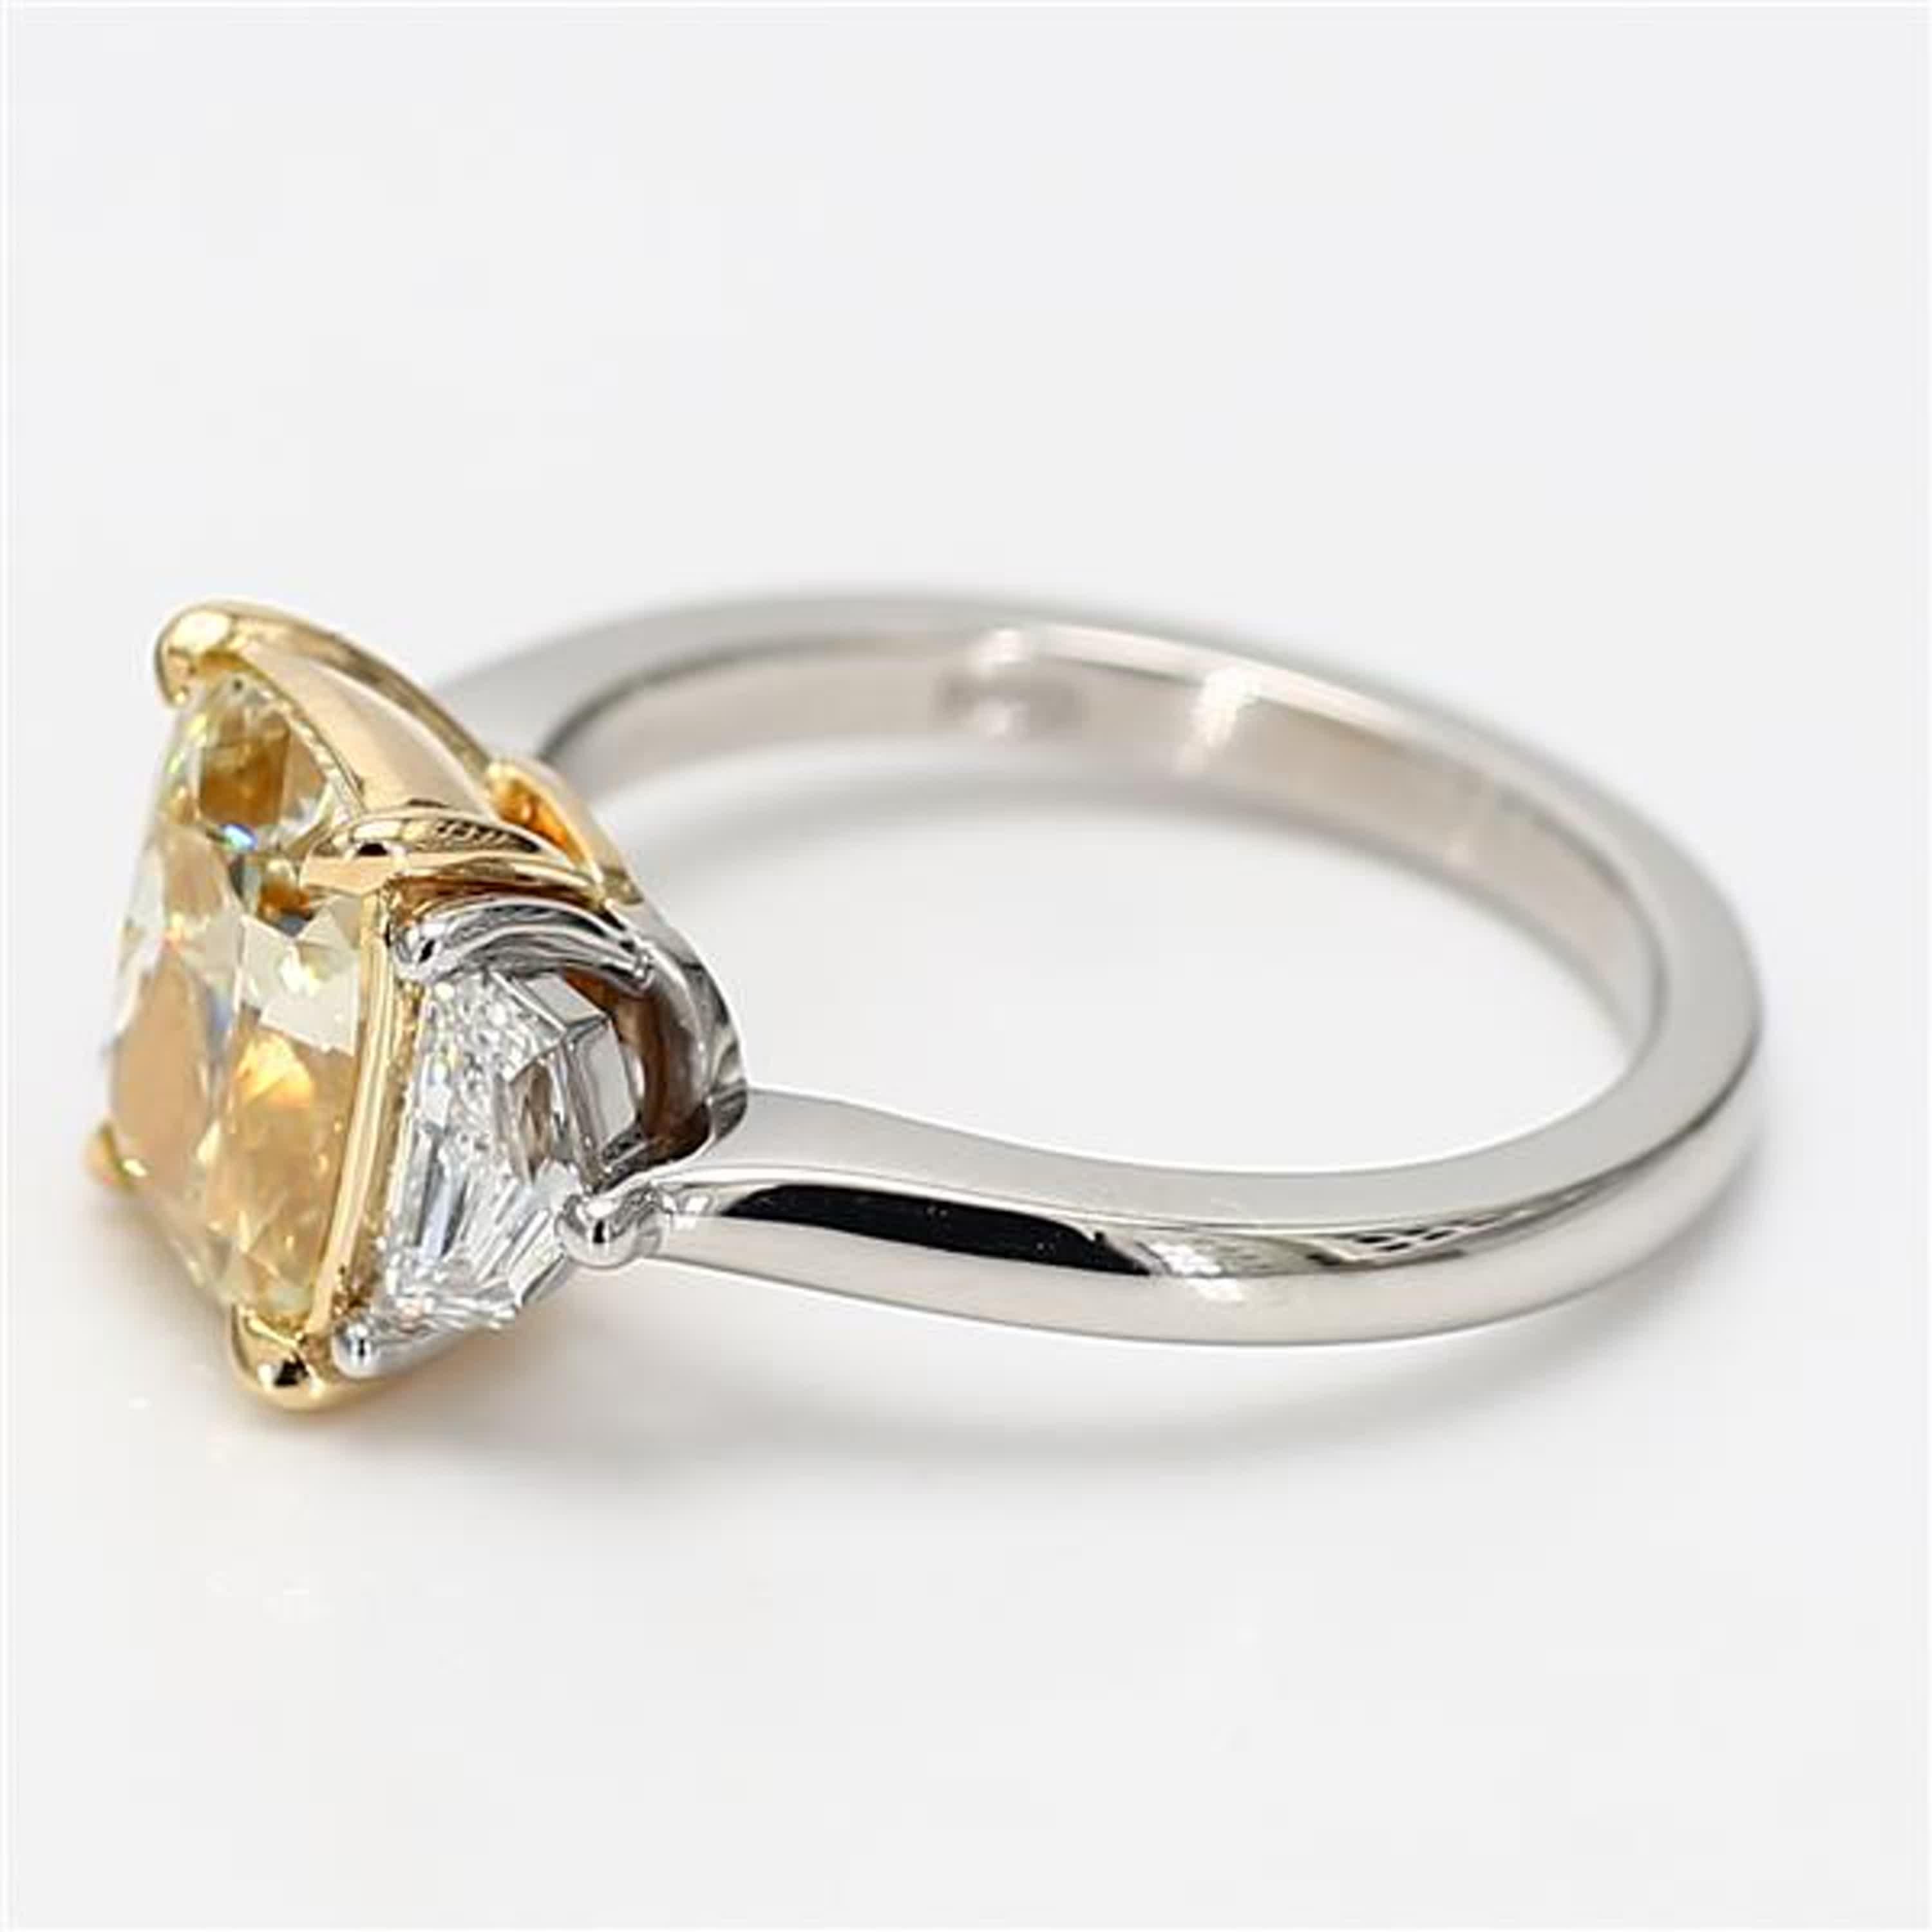 Contemporary GIA Certified Natural Yellow Cushion Diamond 3.54 Carat TW Plat Cocktail Ring